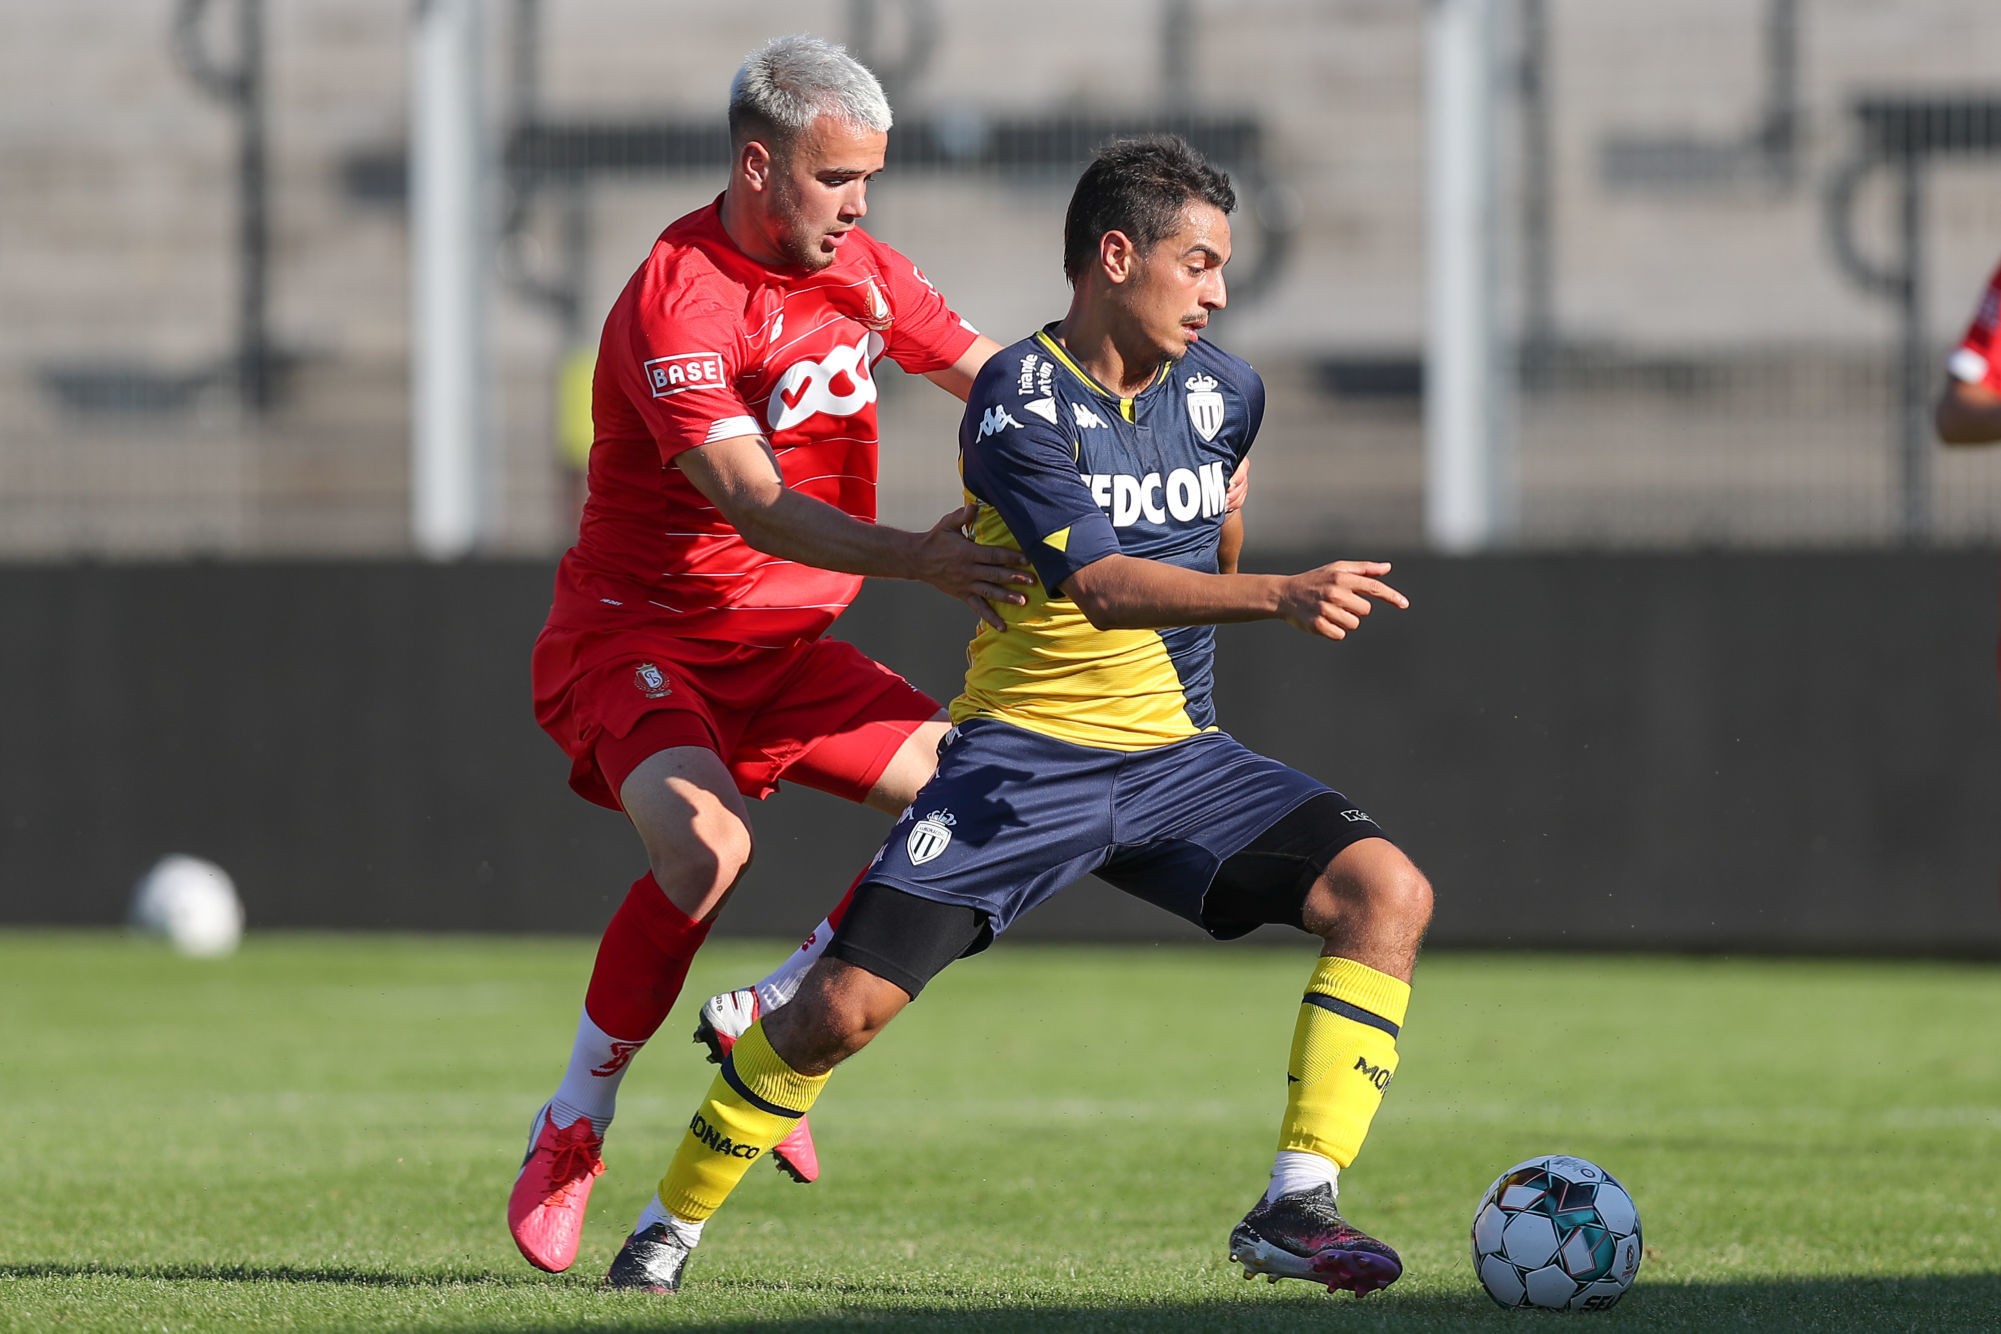 Standard's Nicolas Raskin and Monaco's Wissam Ben Yedder fight for the ball during a friendly soccer game between Standard de Liege and AS Monaco, Wednesday 22 July 2020 in Seraing, in preparation of the upcoming 2020-2021 Jupiler Pro League season. BELGA PHOTO BRUNO FAHY 


Photo by Icon Sport - Maurice Dufrasne - Liège (Belgique)